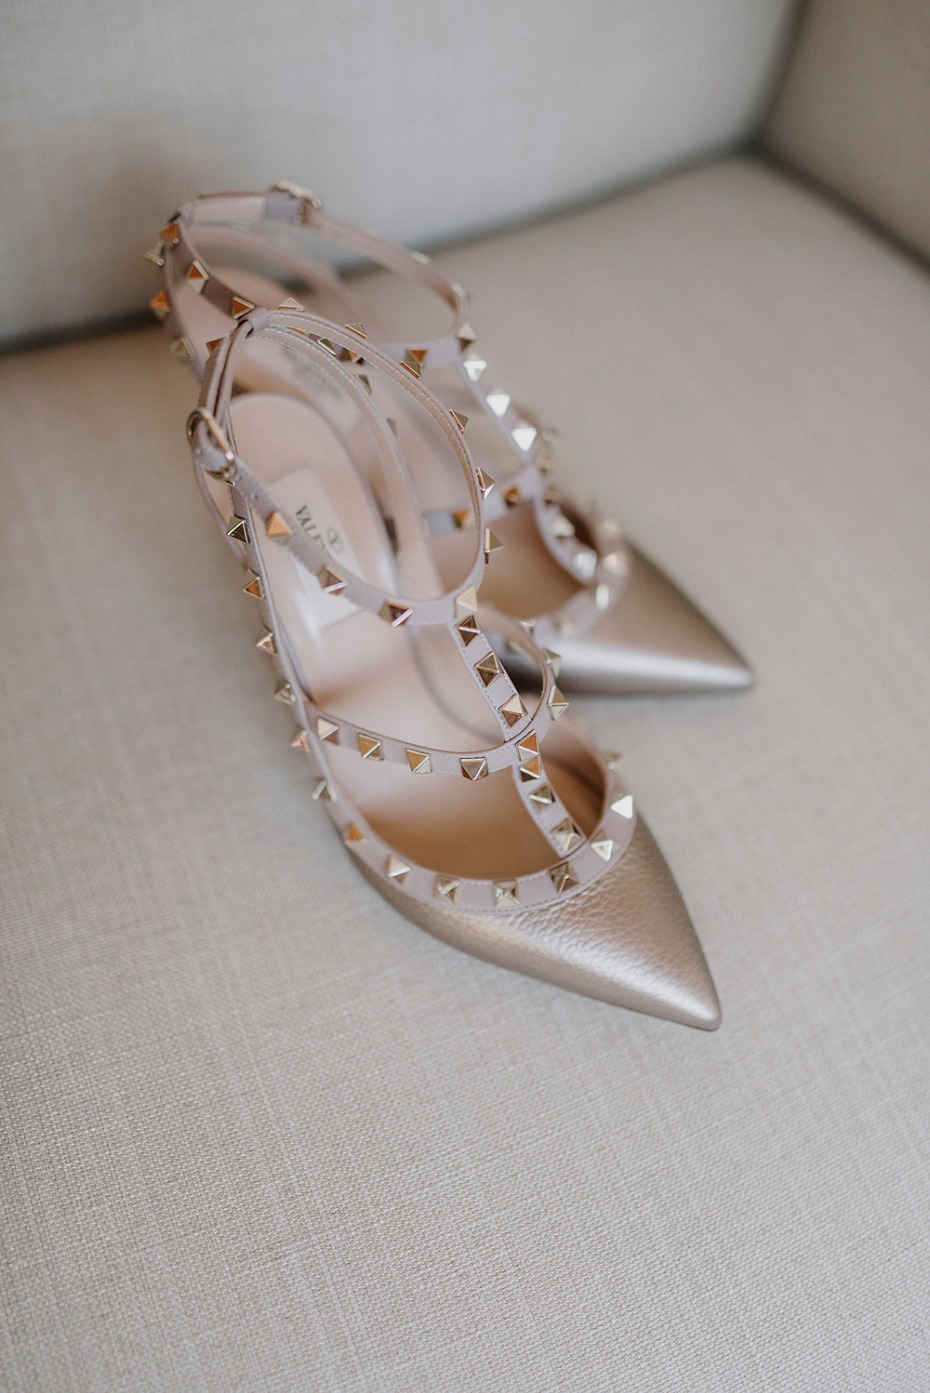 studded wedding shoes for the bride